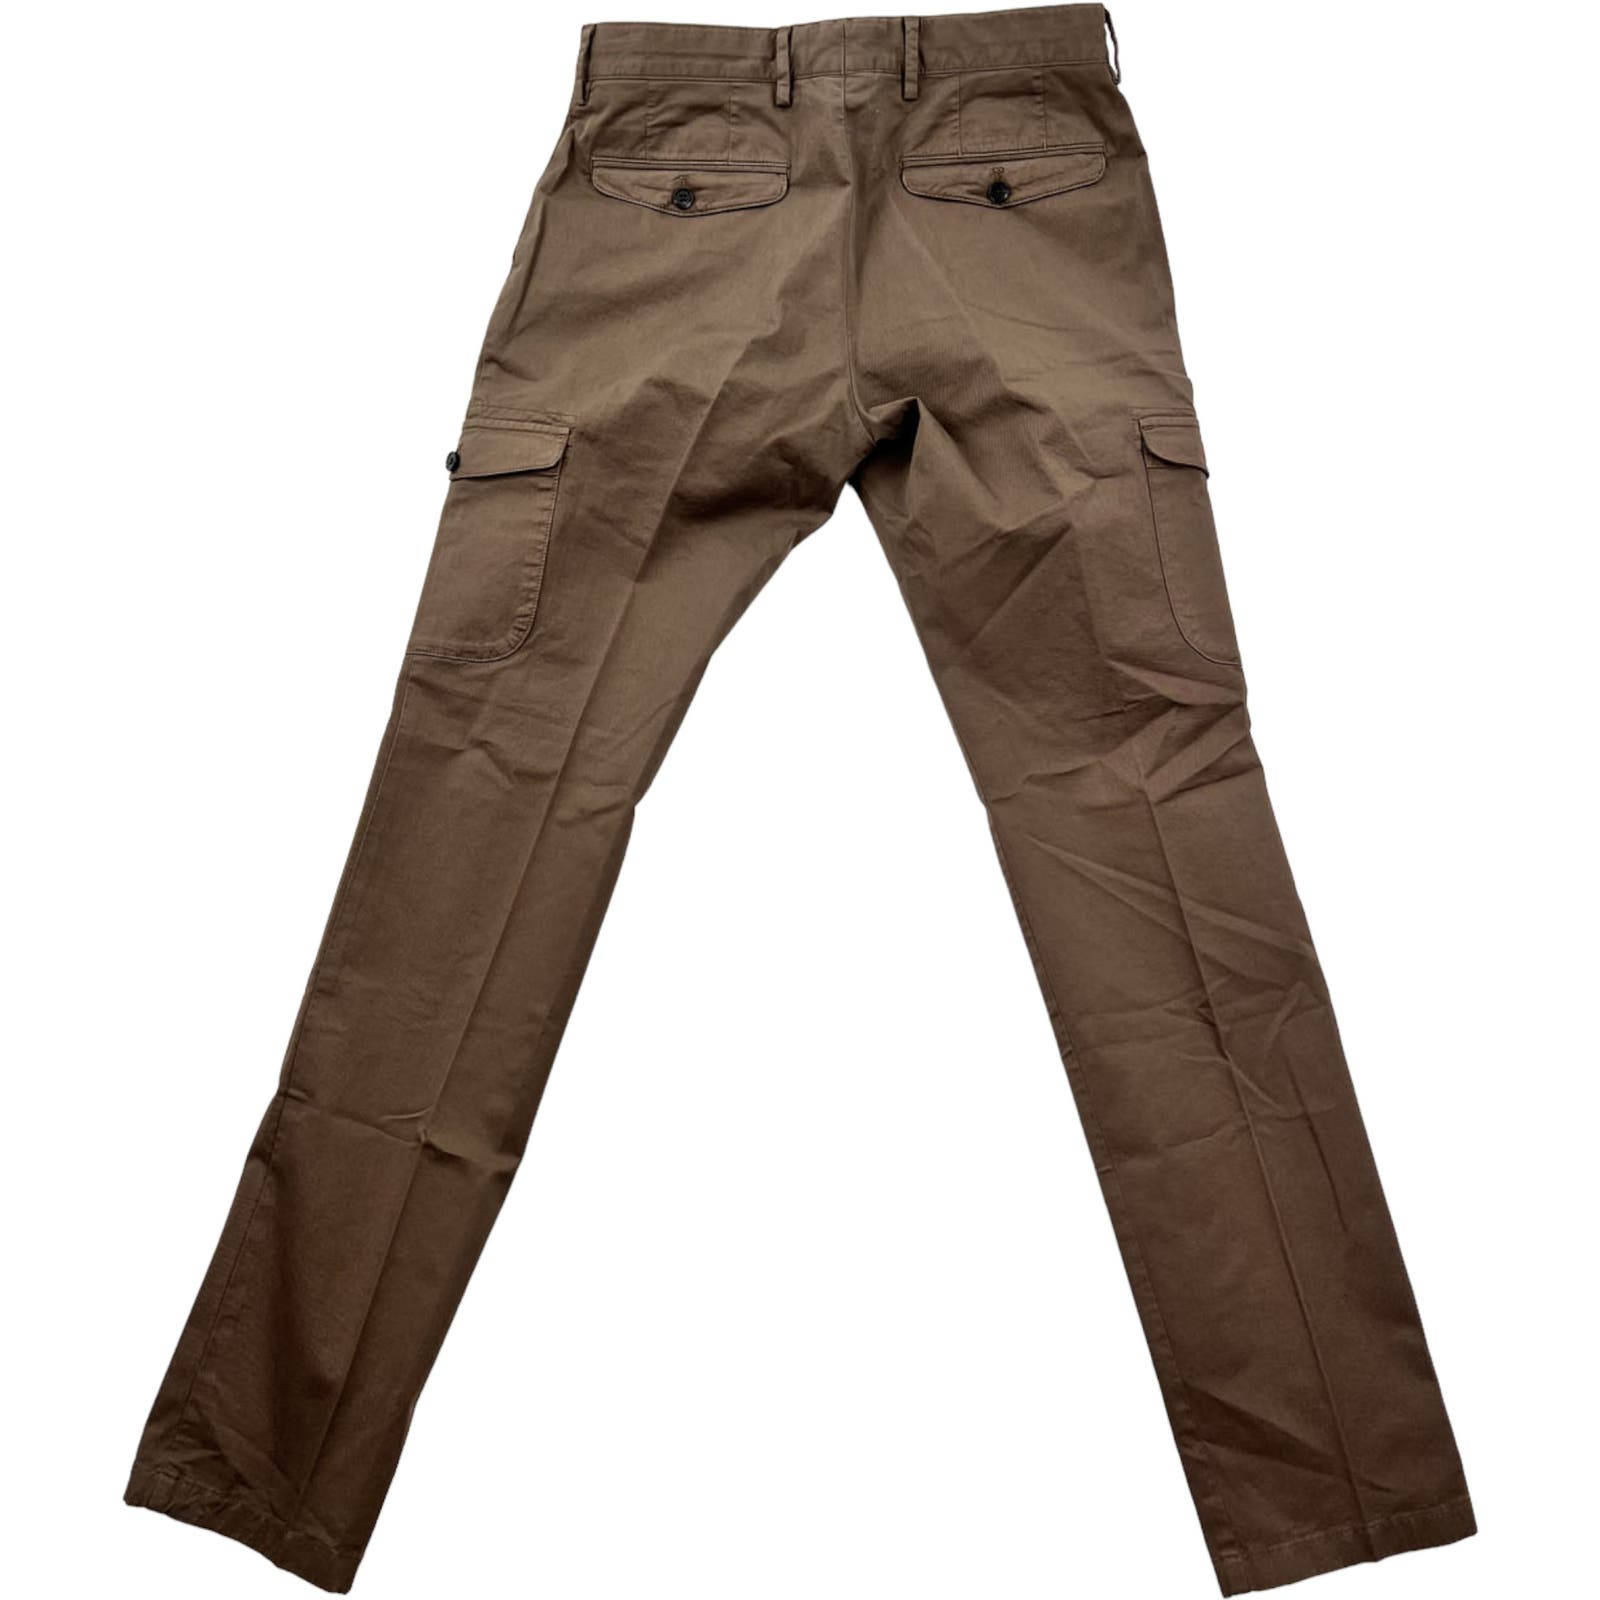 Dylan Gray Men Brown Jeans US 31 Classic Fit Cargo Pants